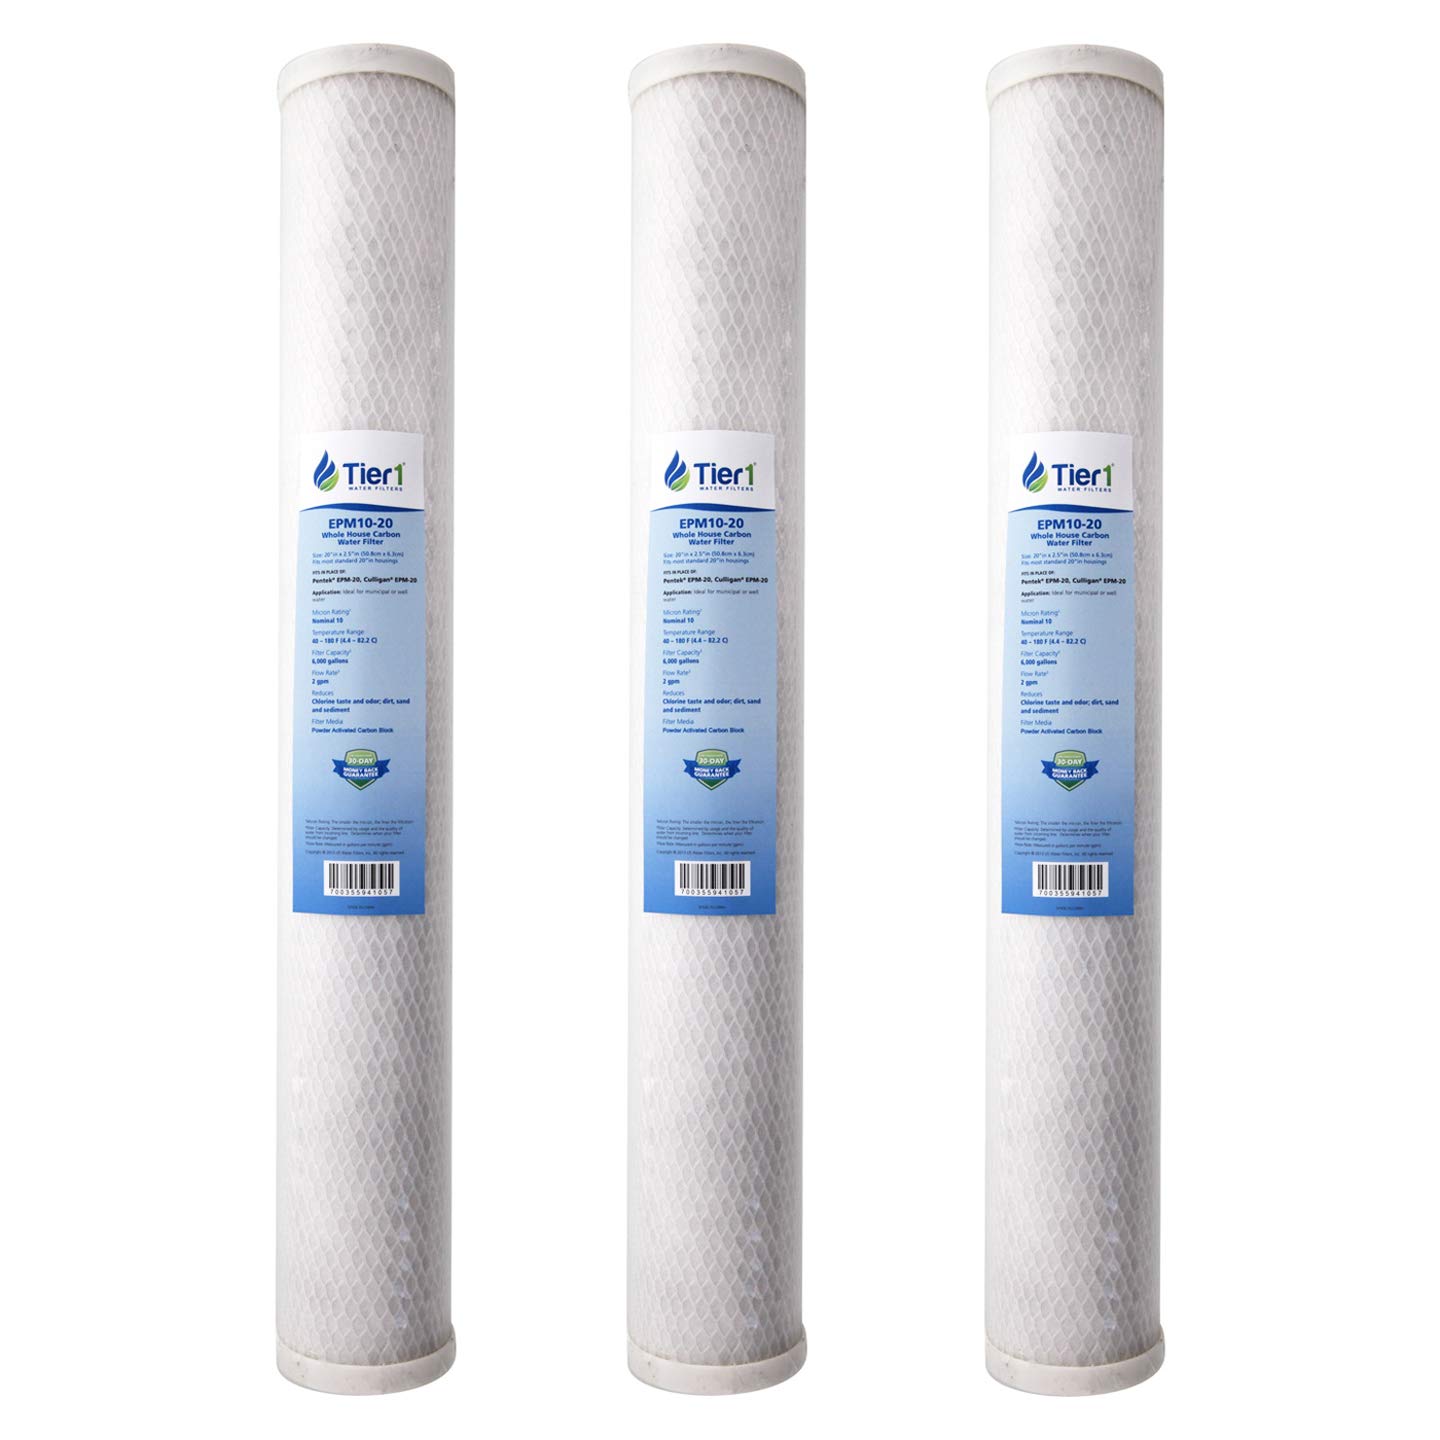 Tier1 10 Micron 20 Inch x 2.5 Inch | 3-Pack Whole House Carbon Block Water Filter Replacement Cartridge | Compatible with Pentek EPM-20, 155635-43, CB-25-2010, Home Water Filter